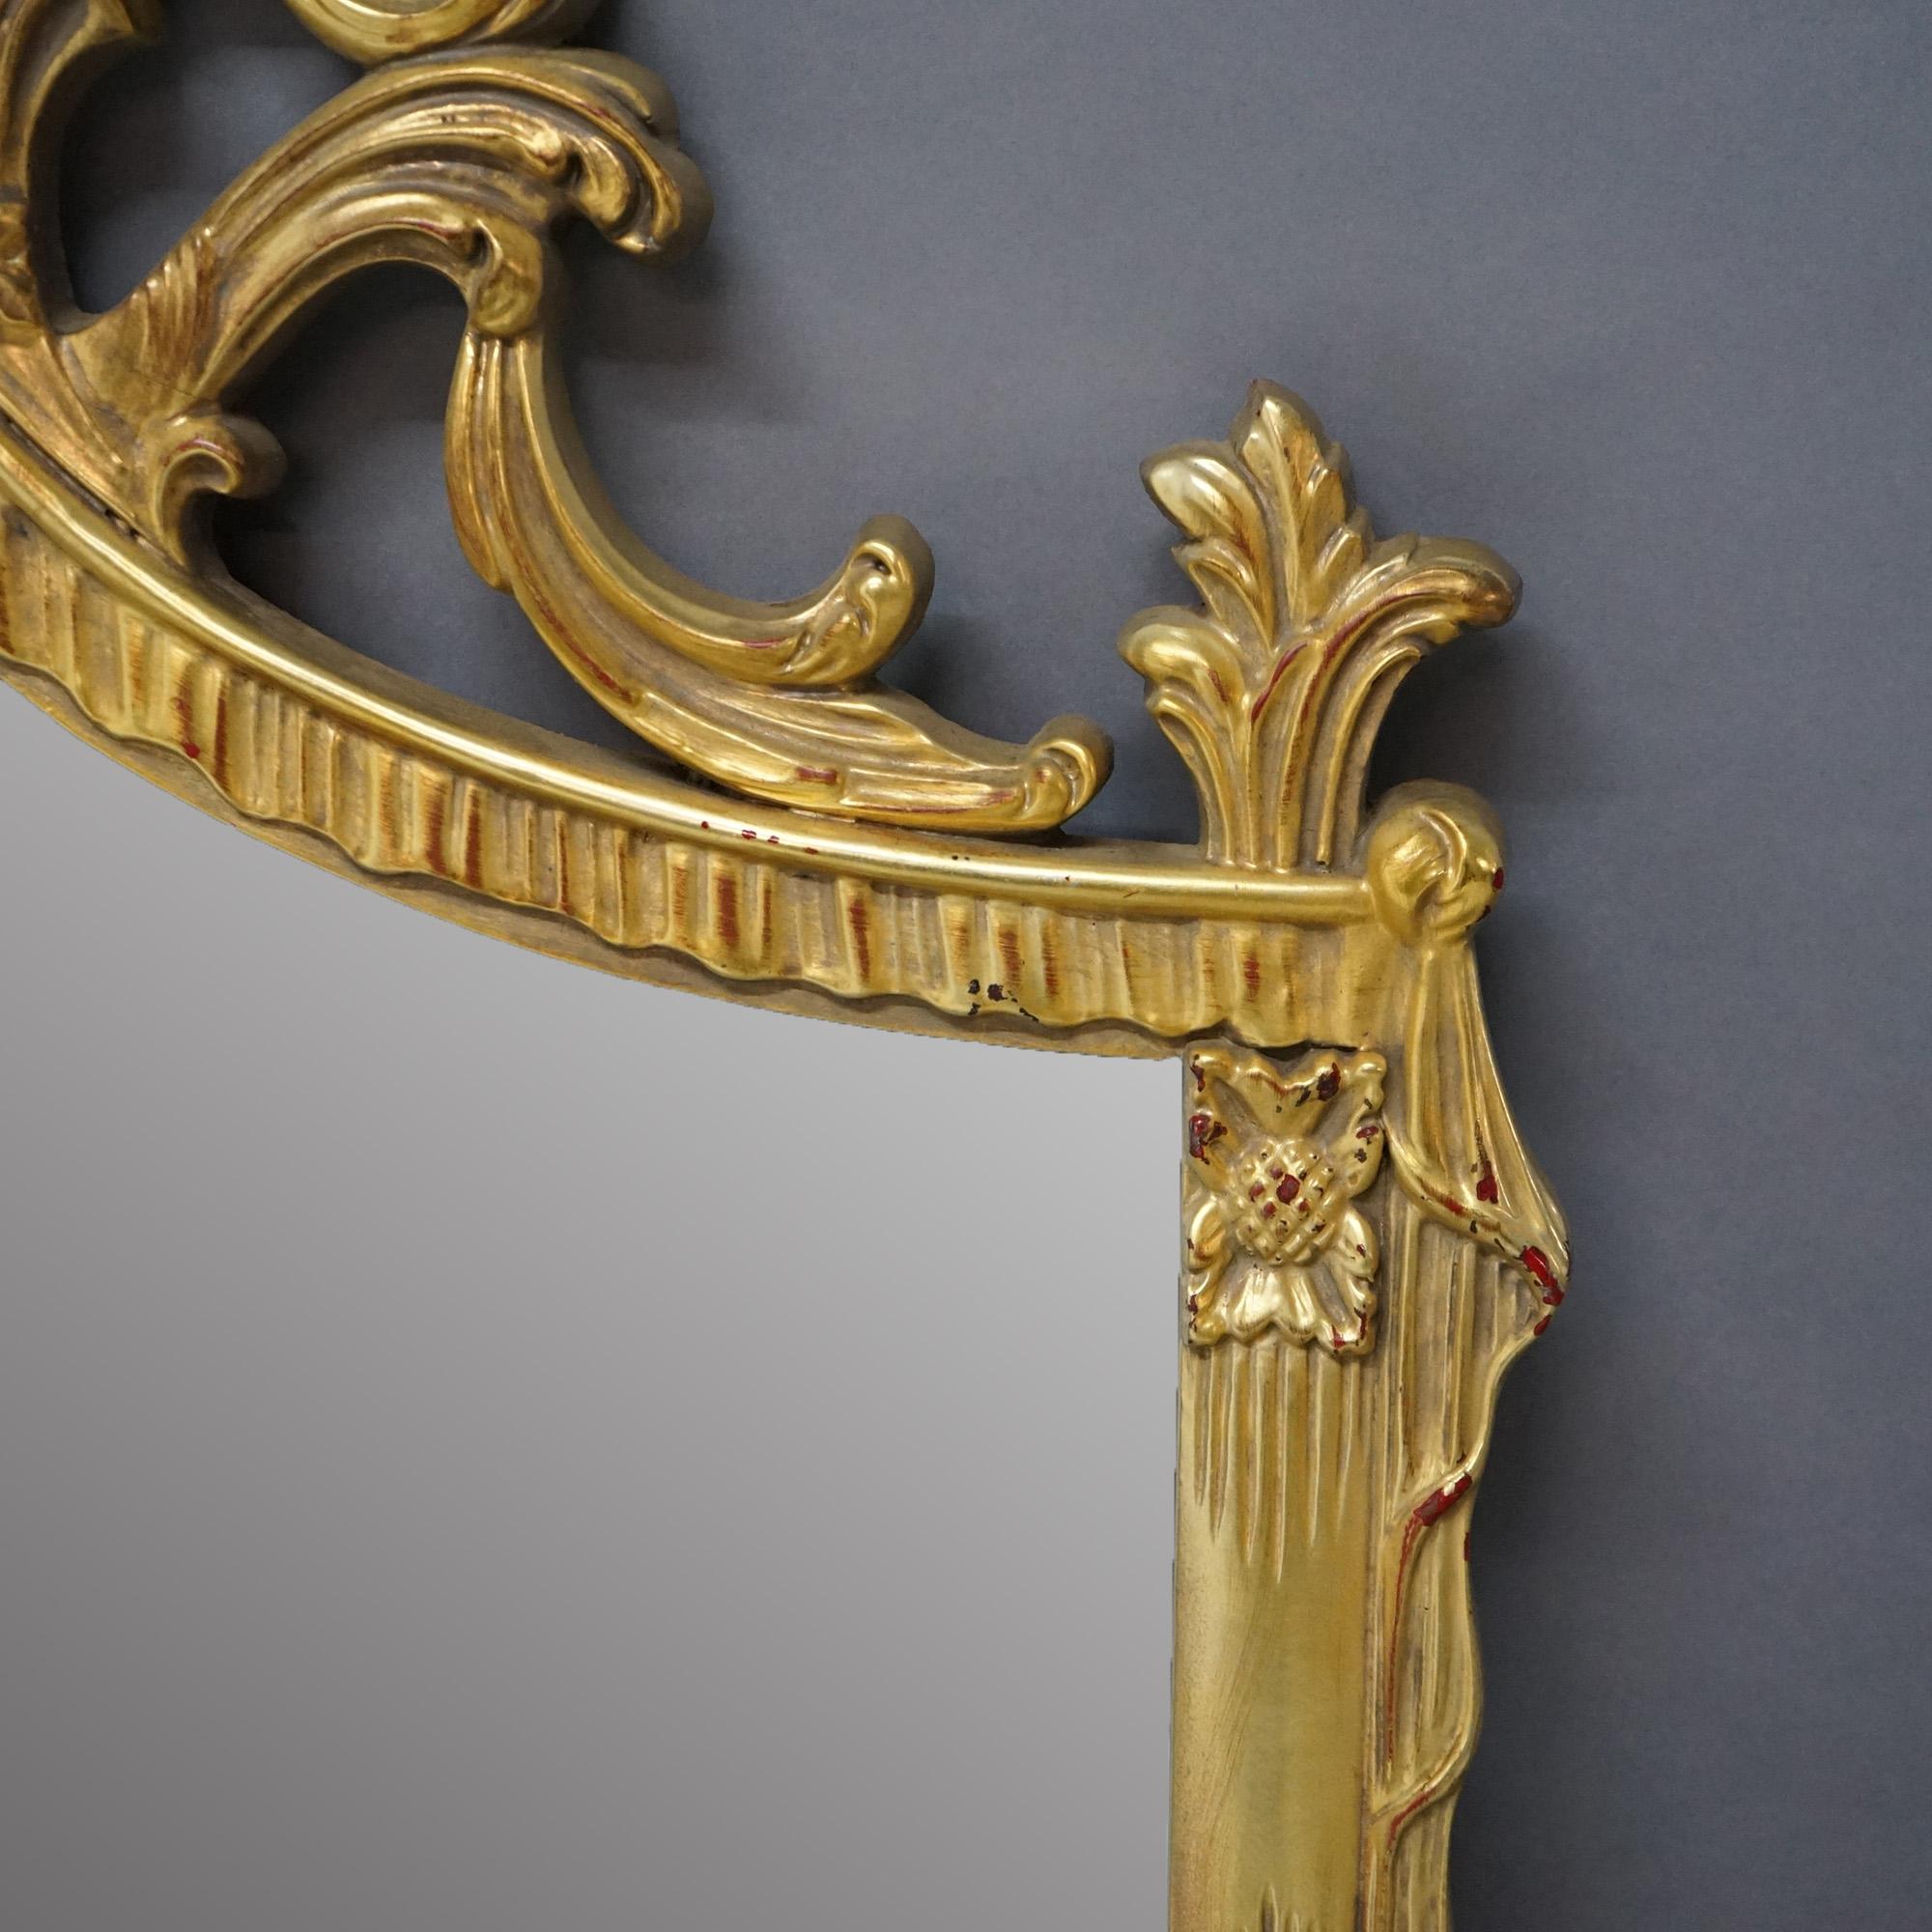 20th Century French Louis XIV Style Giltwood Wall Mirror 20th C